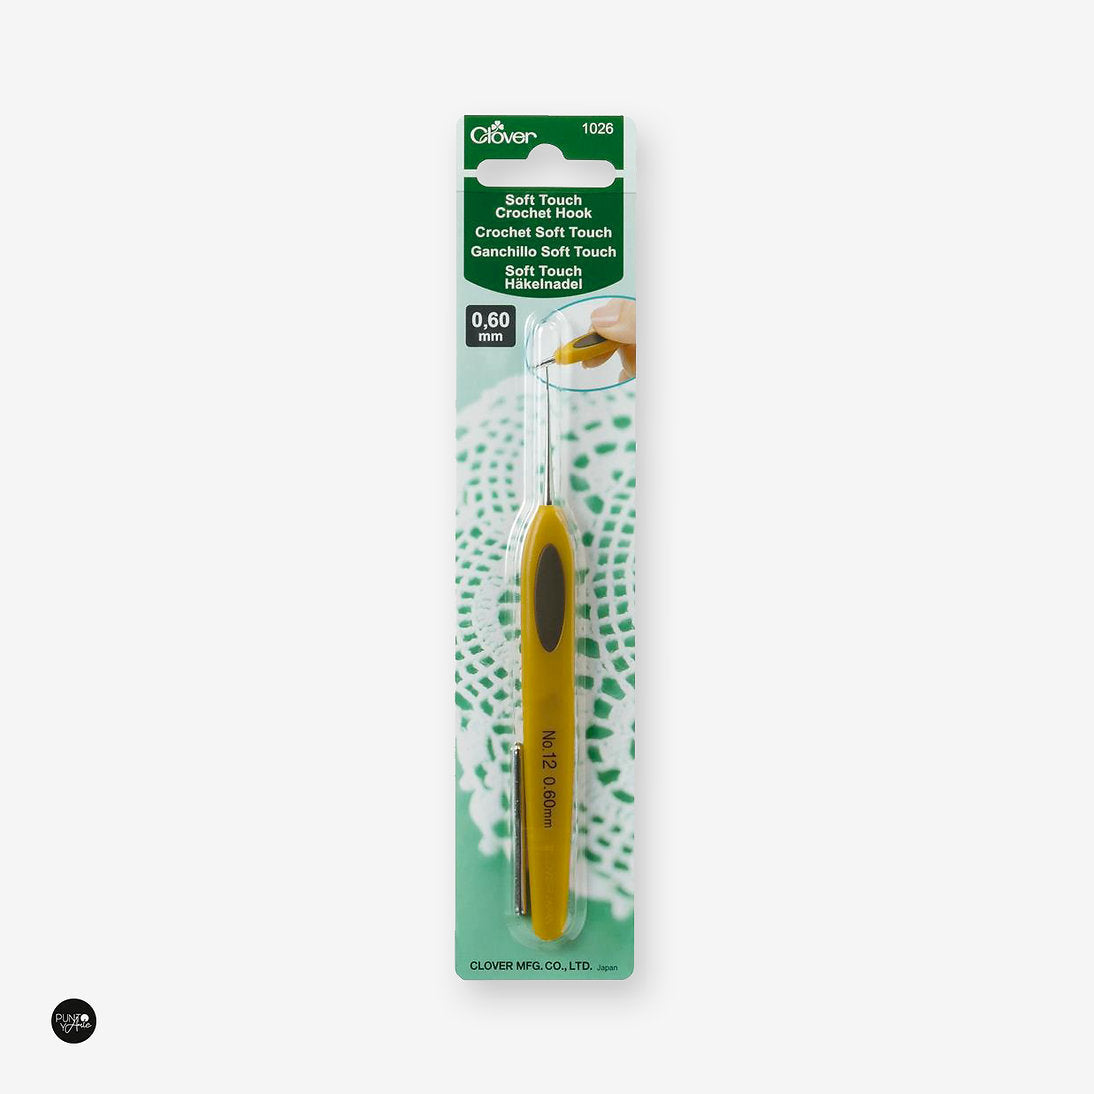 Clover Soft Touch Steel Crochet Hook: Precision and Comfort in Every Stitch